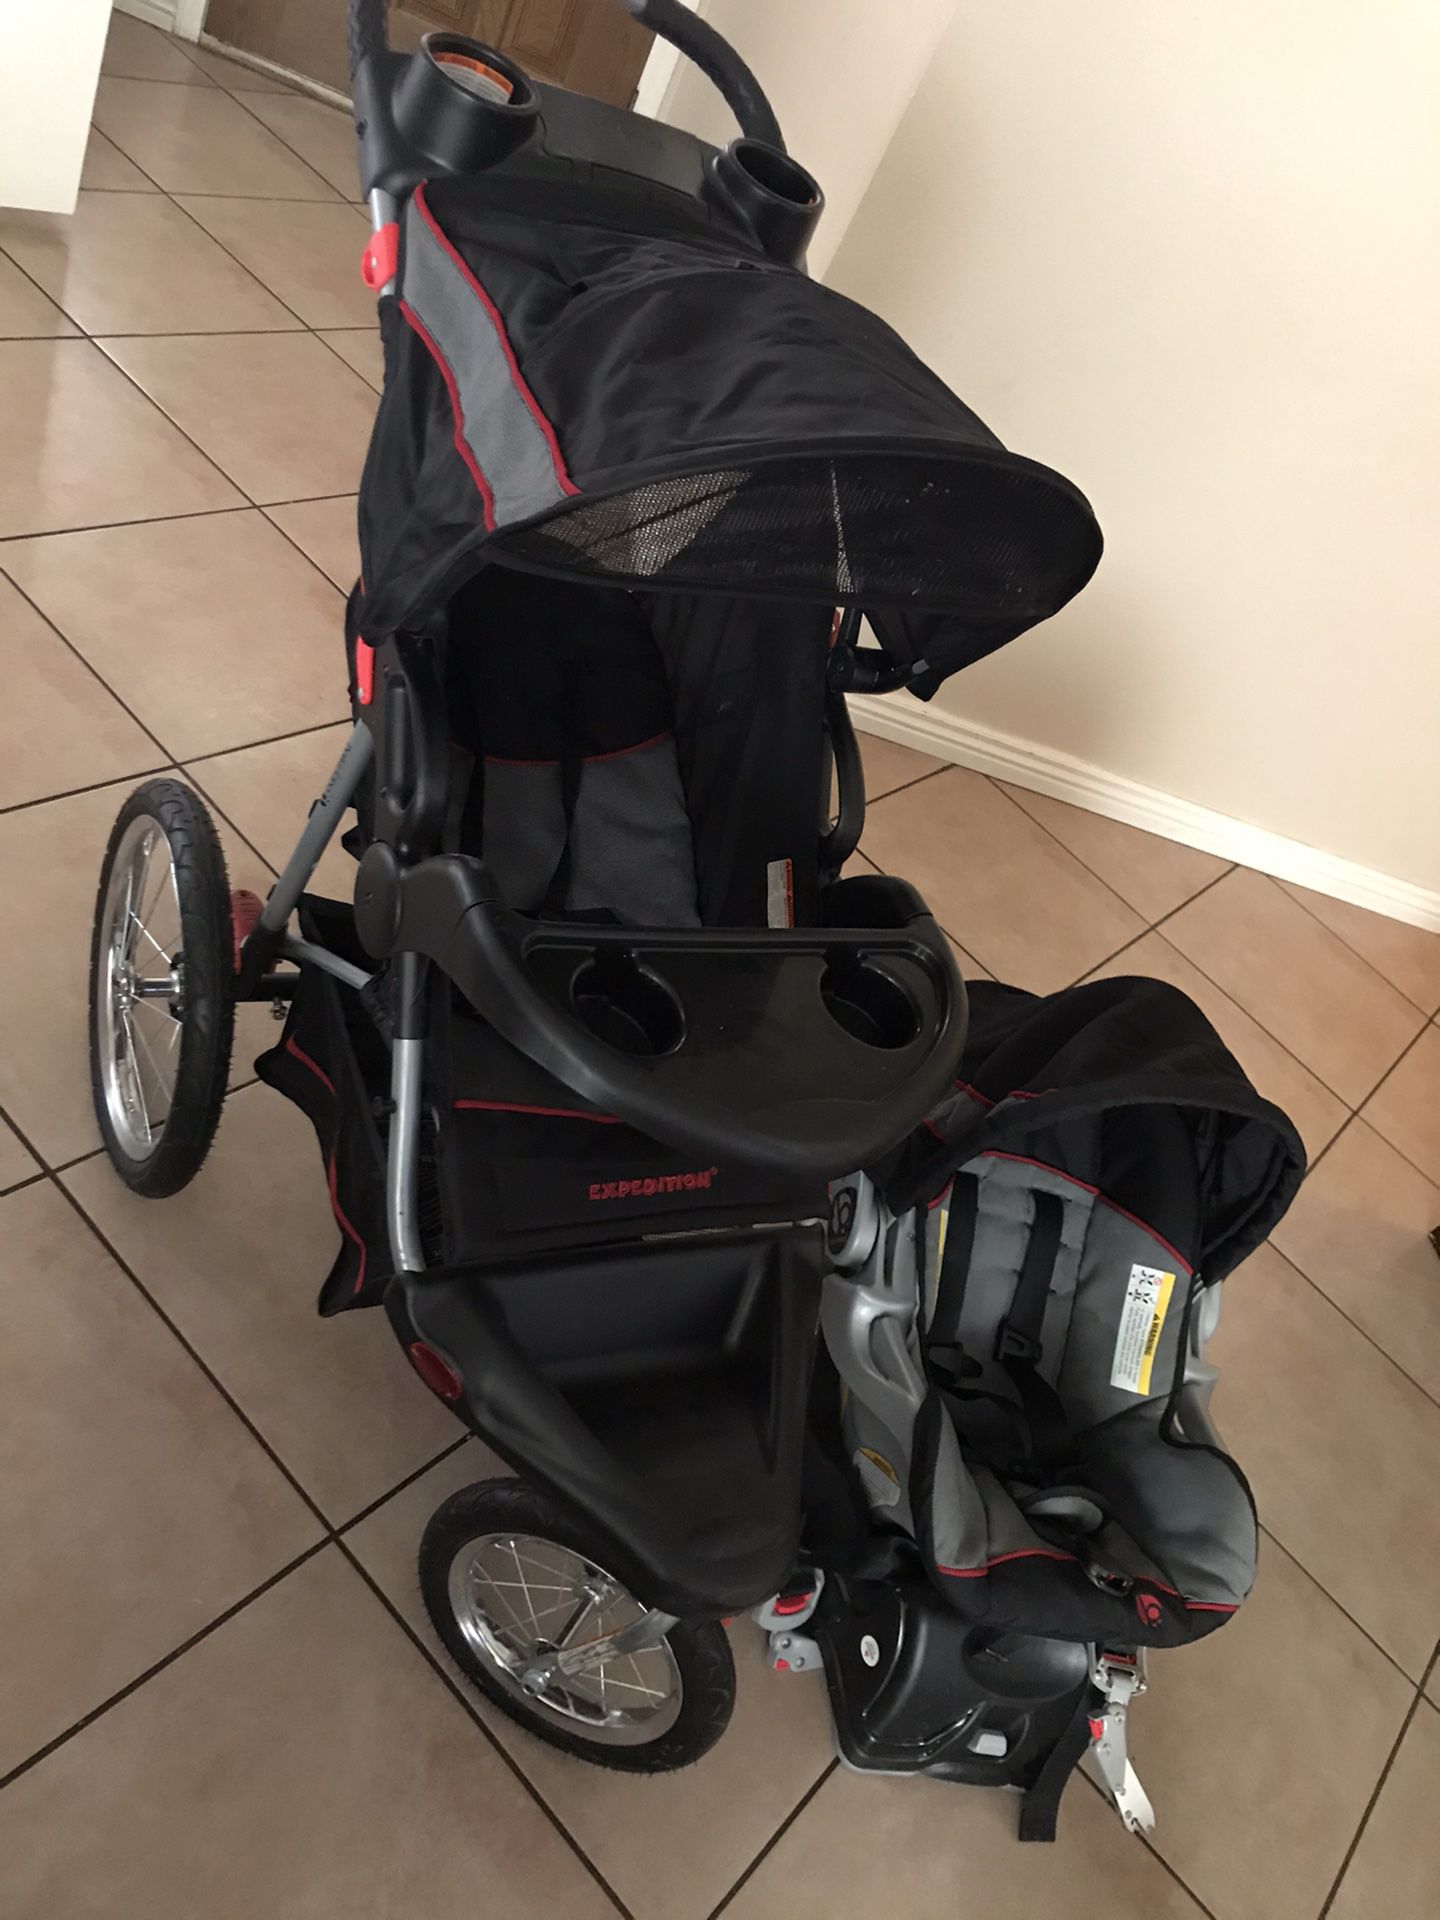 Babytrend expedition jogging stroller with car seat